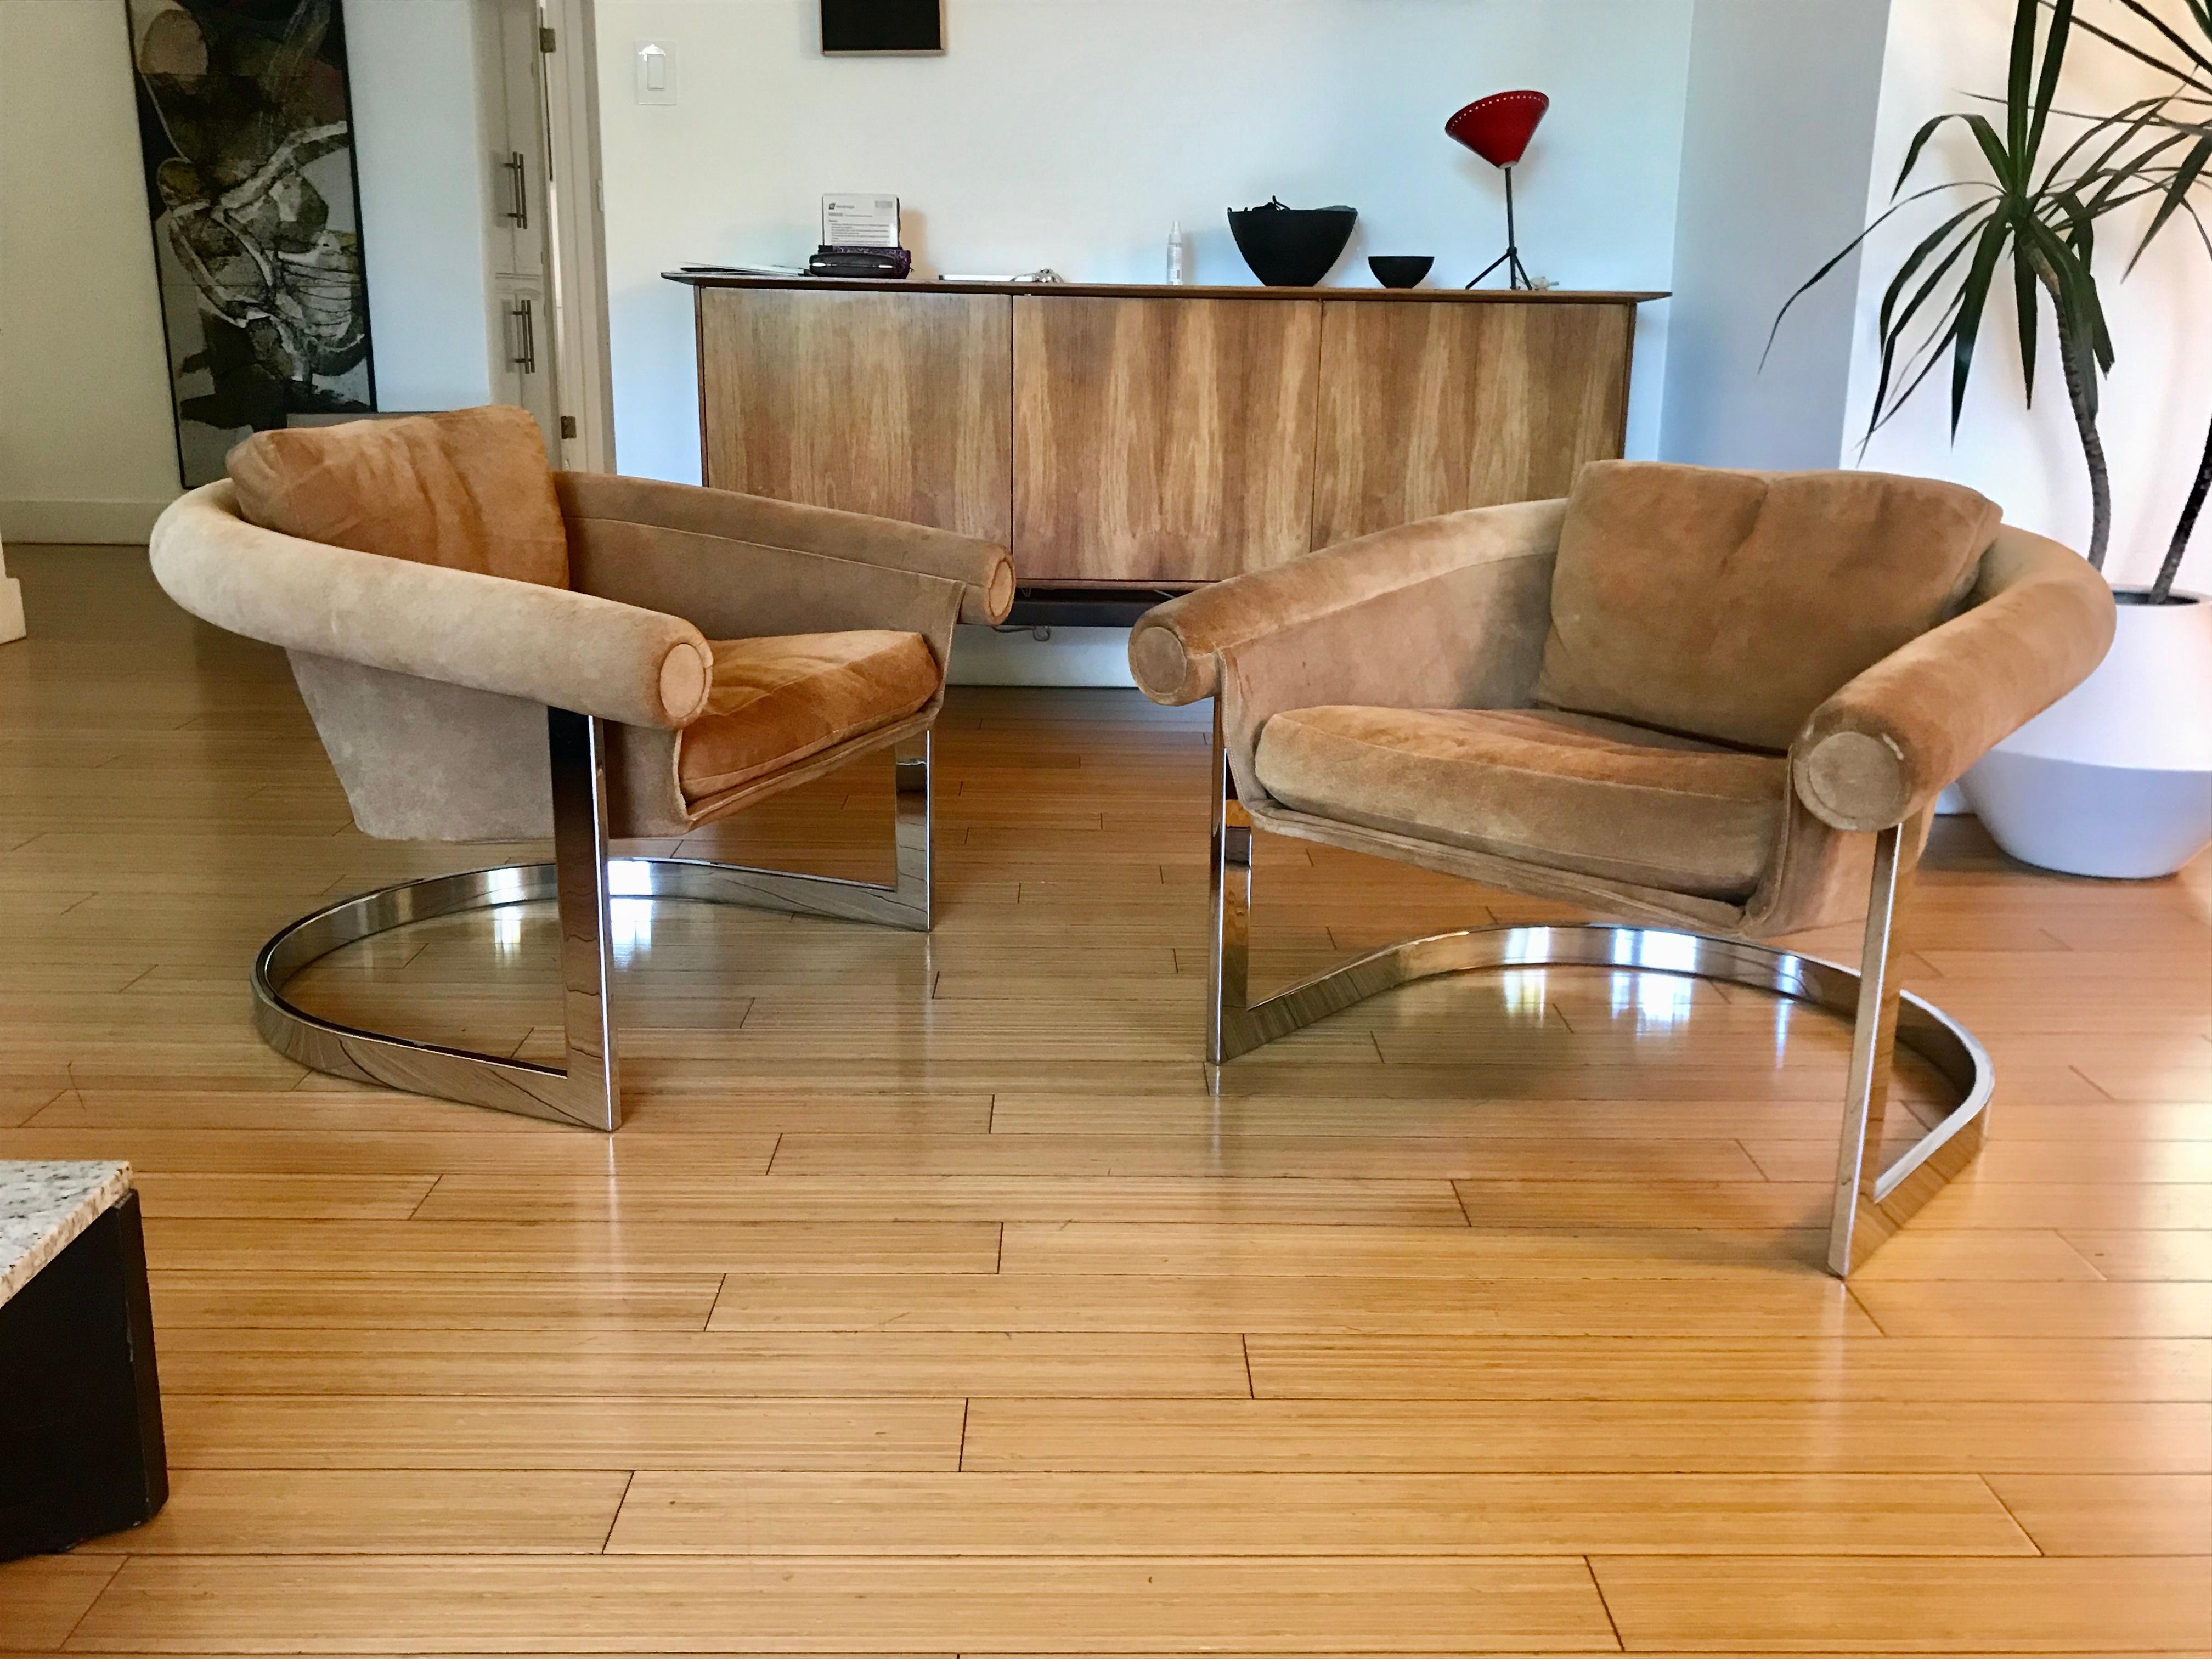 handsome pair of lounge chairs
original chestnut suede upholstery with chrome plated steel base
nice sling design floating on a cantilever base
original condition showing minor wear on the suede, a few surface stains, over-all good durable